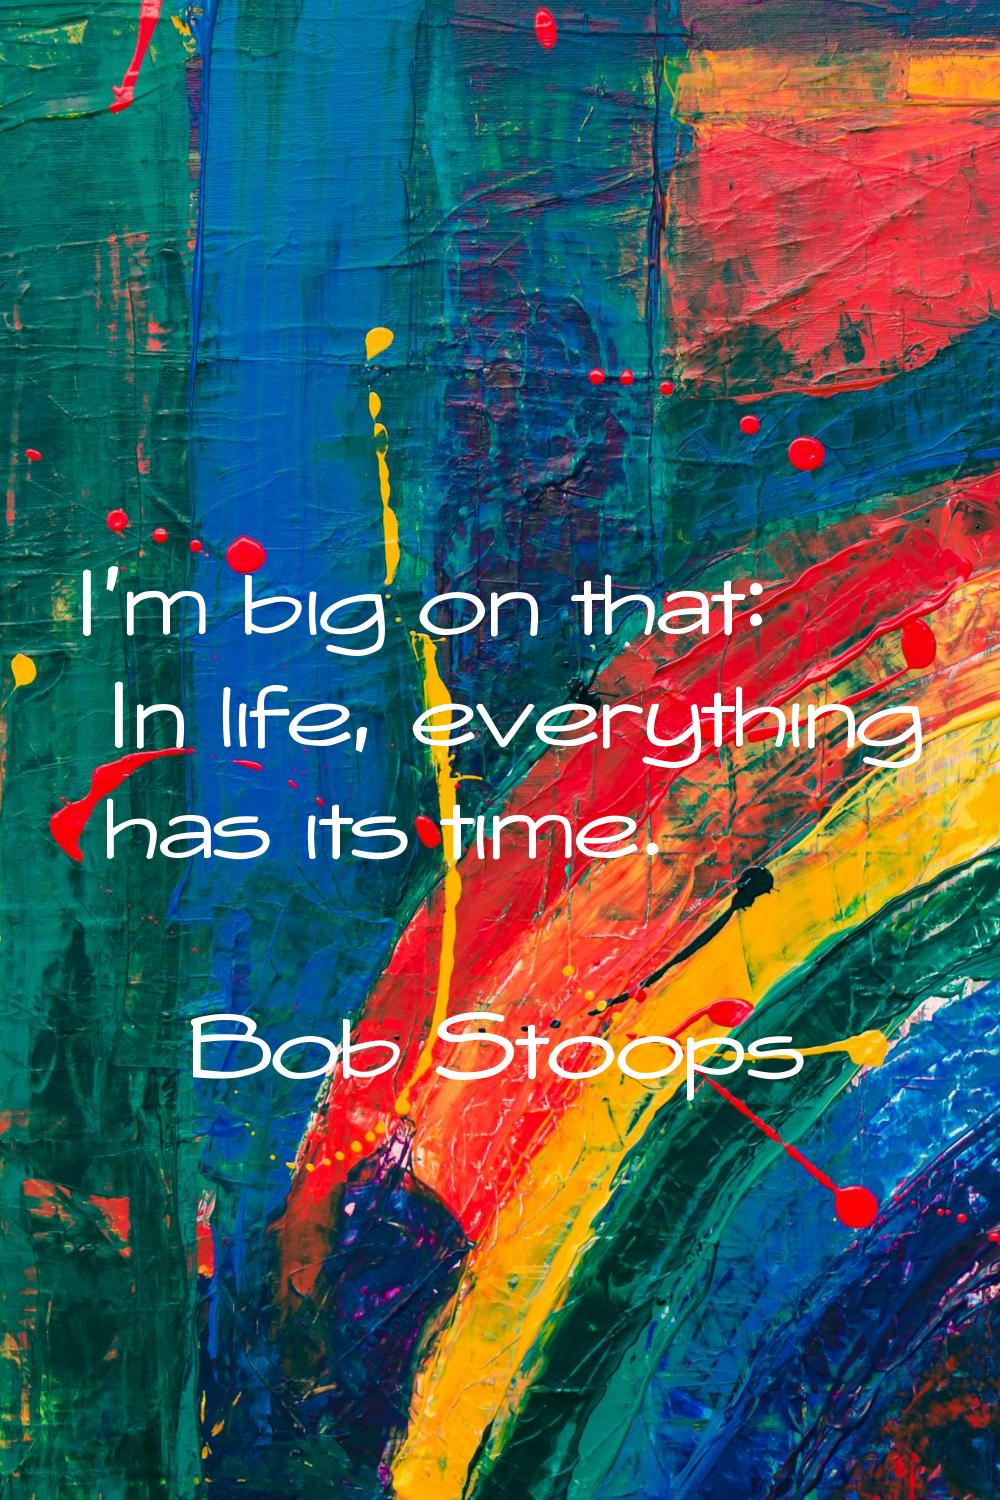 I'm big on that: In life, everything has its time.